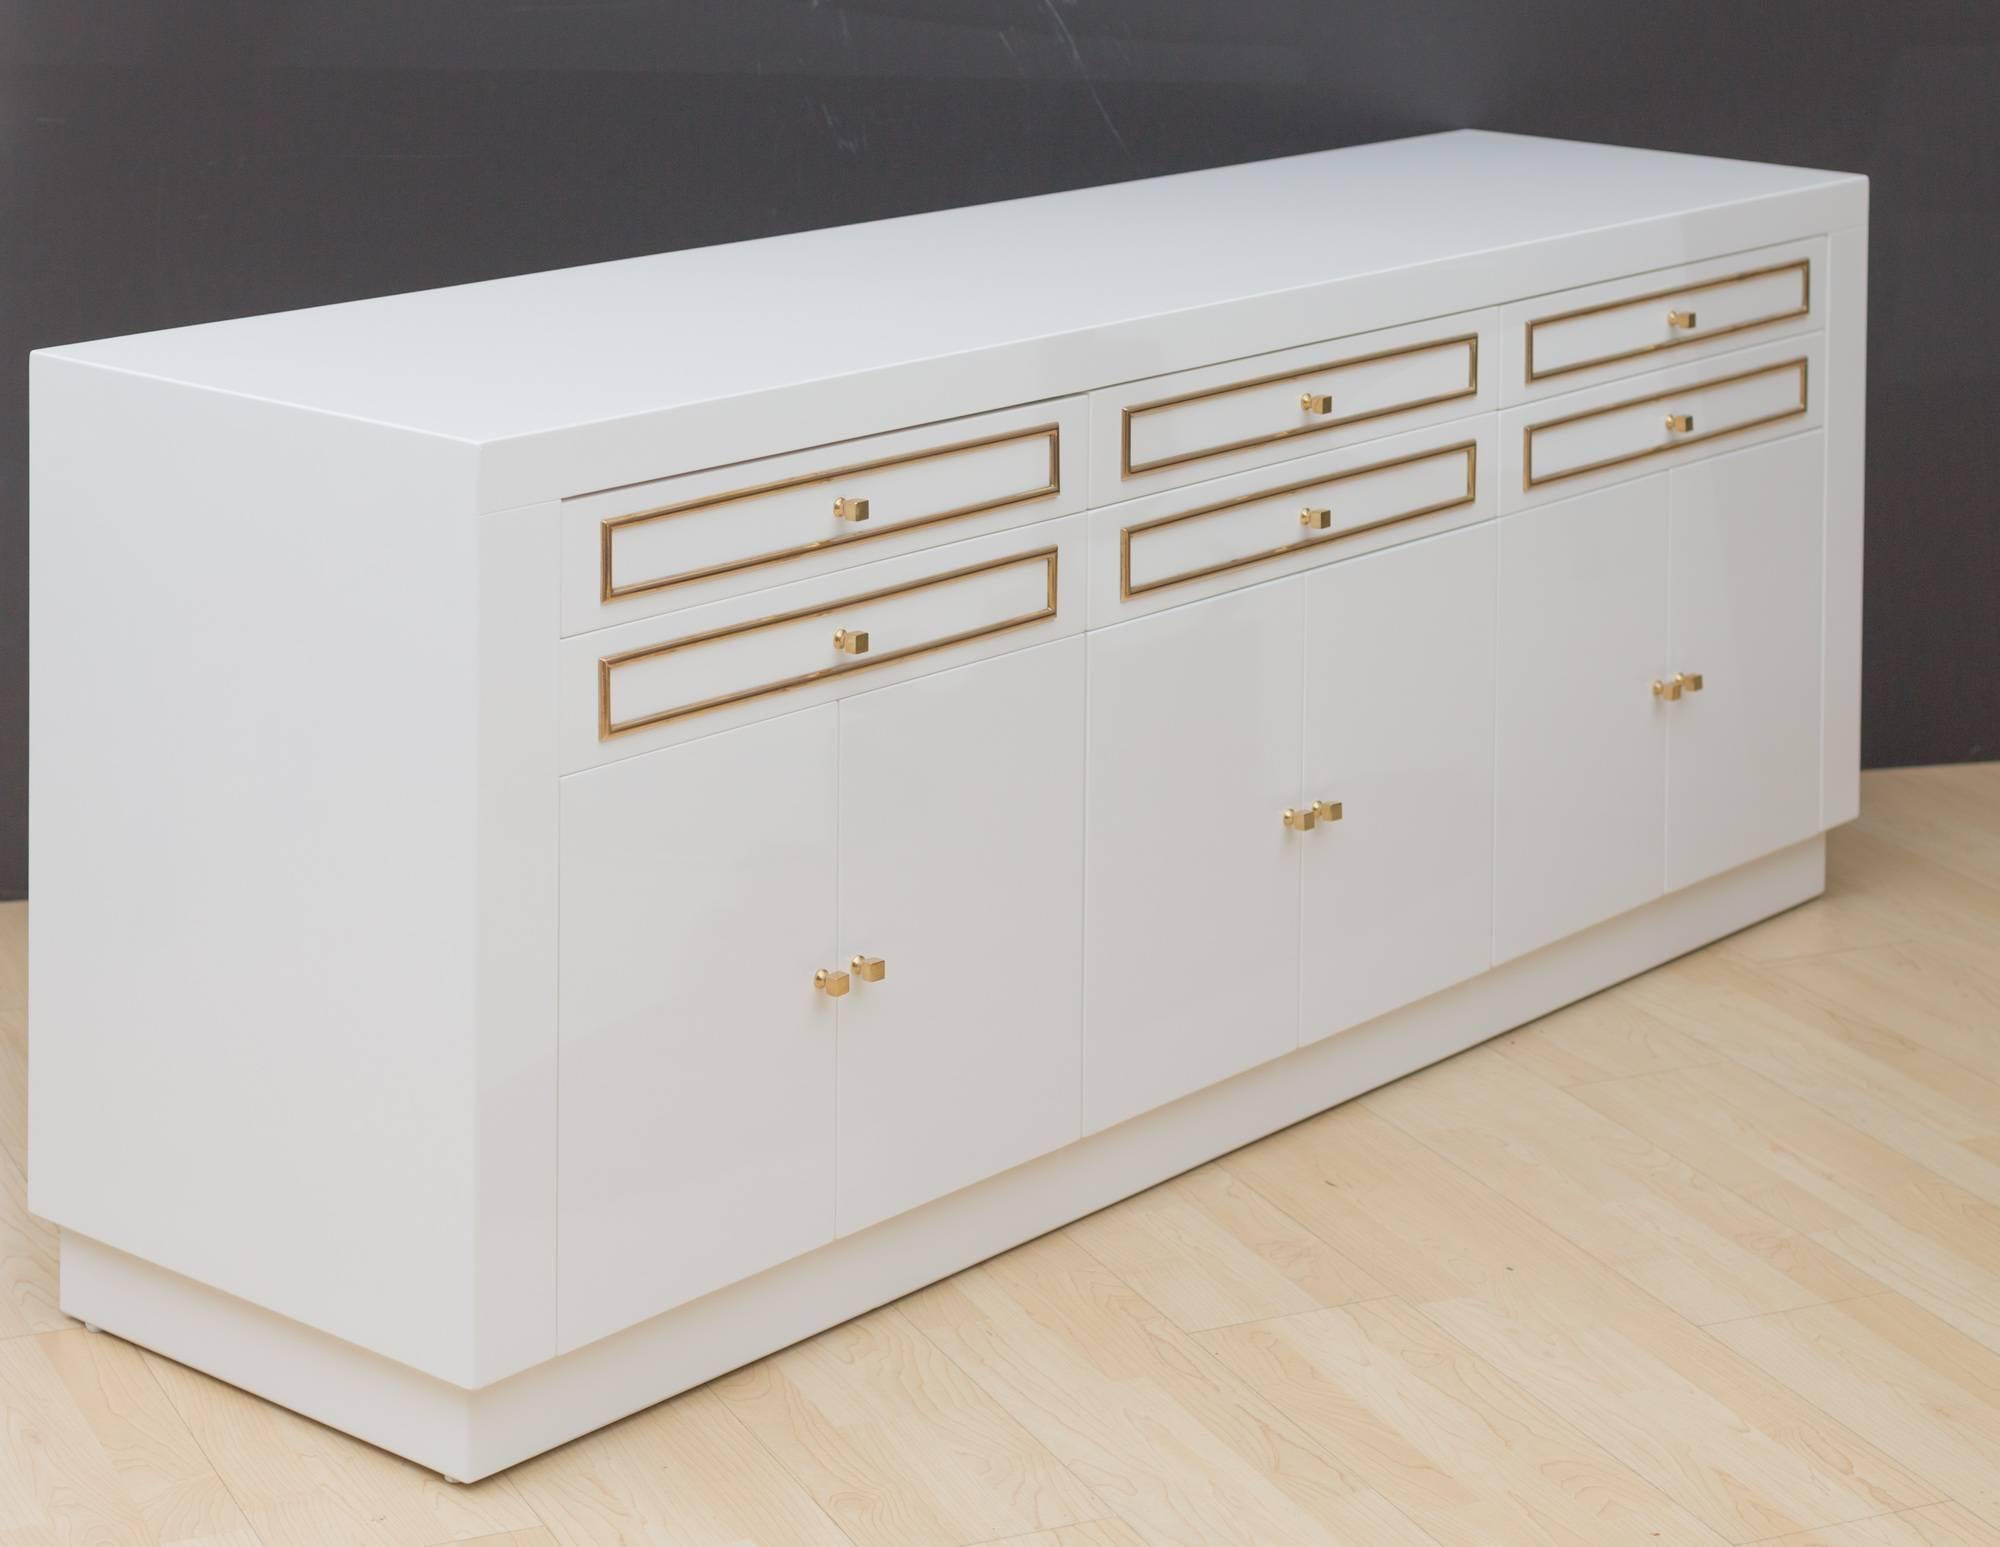 Elegant custom designed lacquered sideboard
featuring six measure: 3.75" H drawers with brass inlays,
three pairs of doors, all flash detailed for slick modern look,
with original solid brass cube pulls.
  